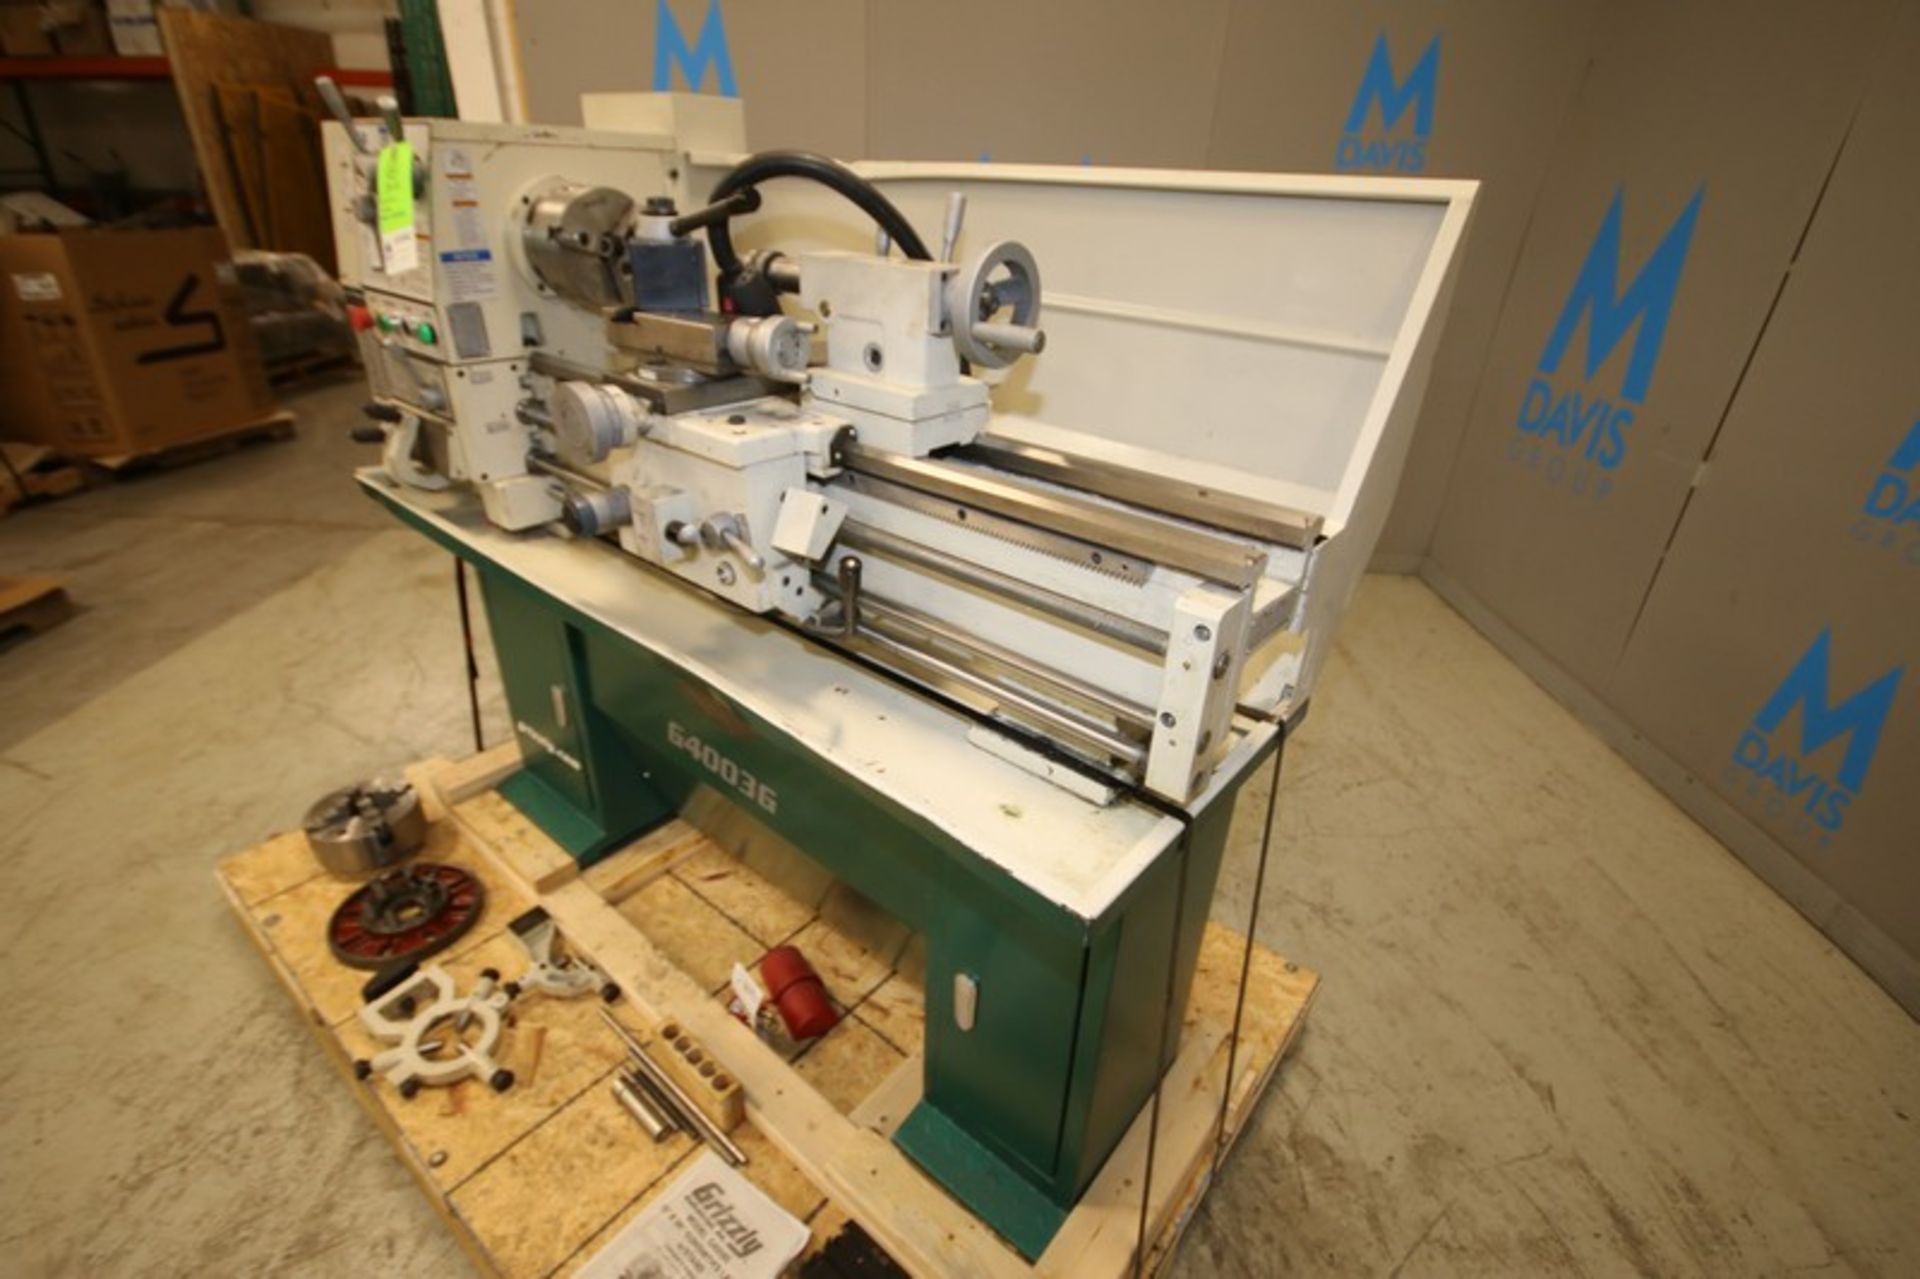 2021 Grizzley 12" x 36" Gunsmith's Lathe, Model G4003G, SN 0120050339, with 2 hp Motor, 220V, - Image 5 of 14